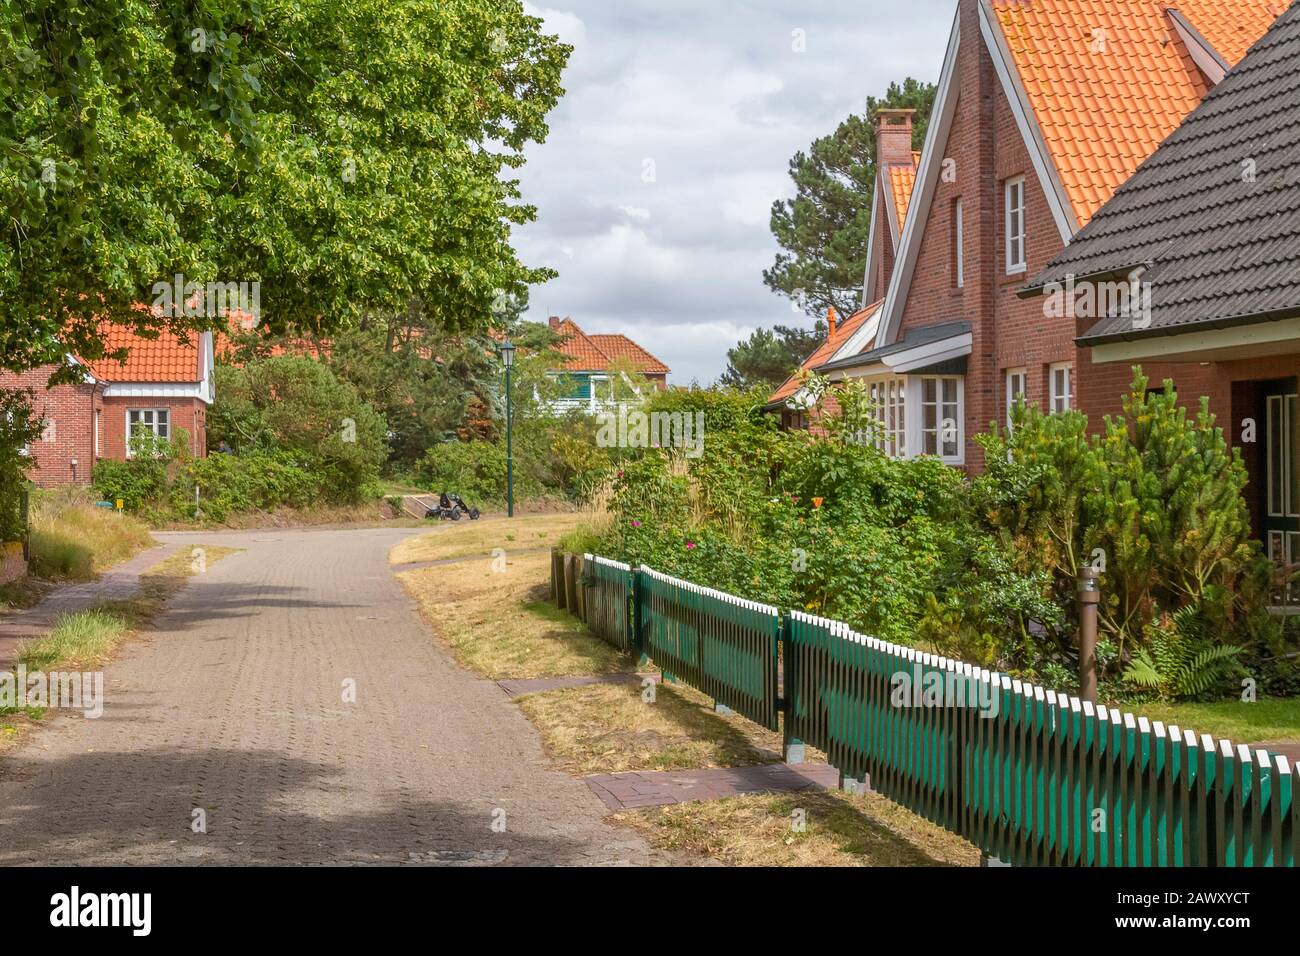 impression of Spiekeroog village which is located at Spiekeroog island, one of the East Frisian Islands at the North Sea coast of Germany Stock Photo